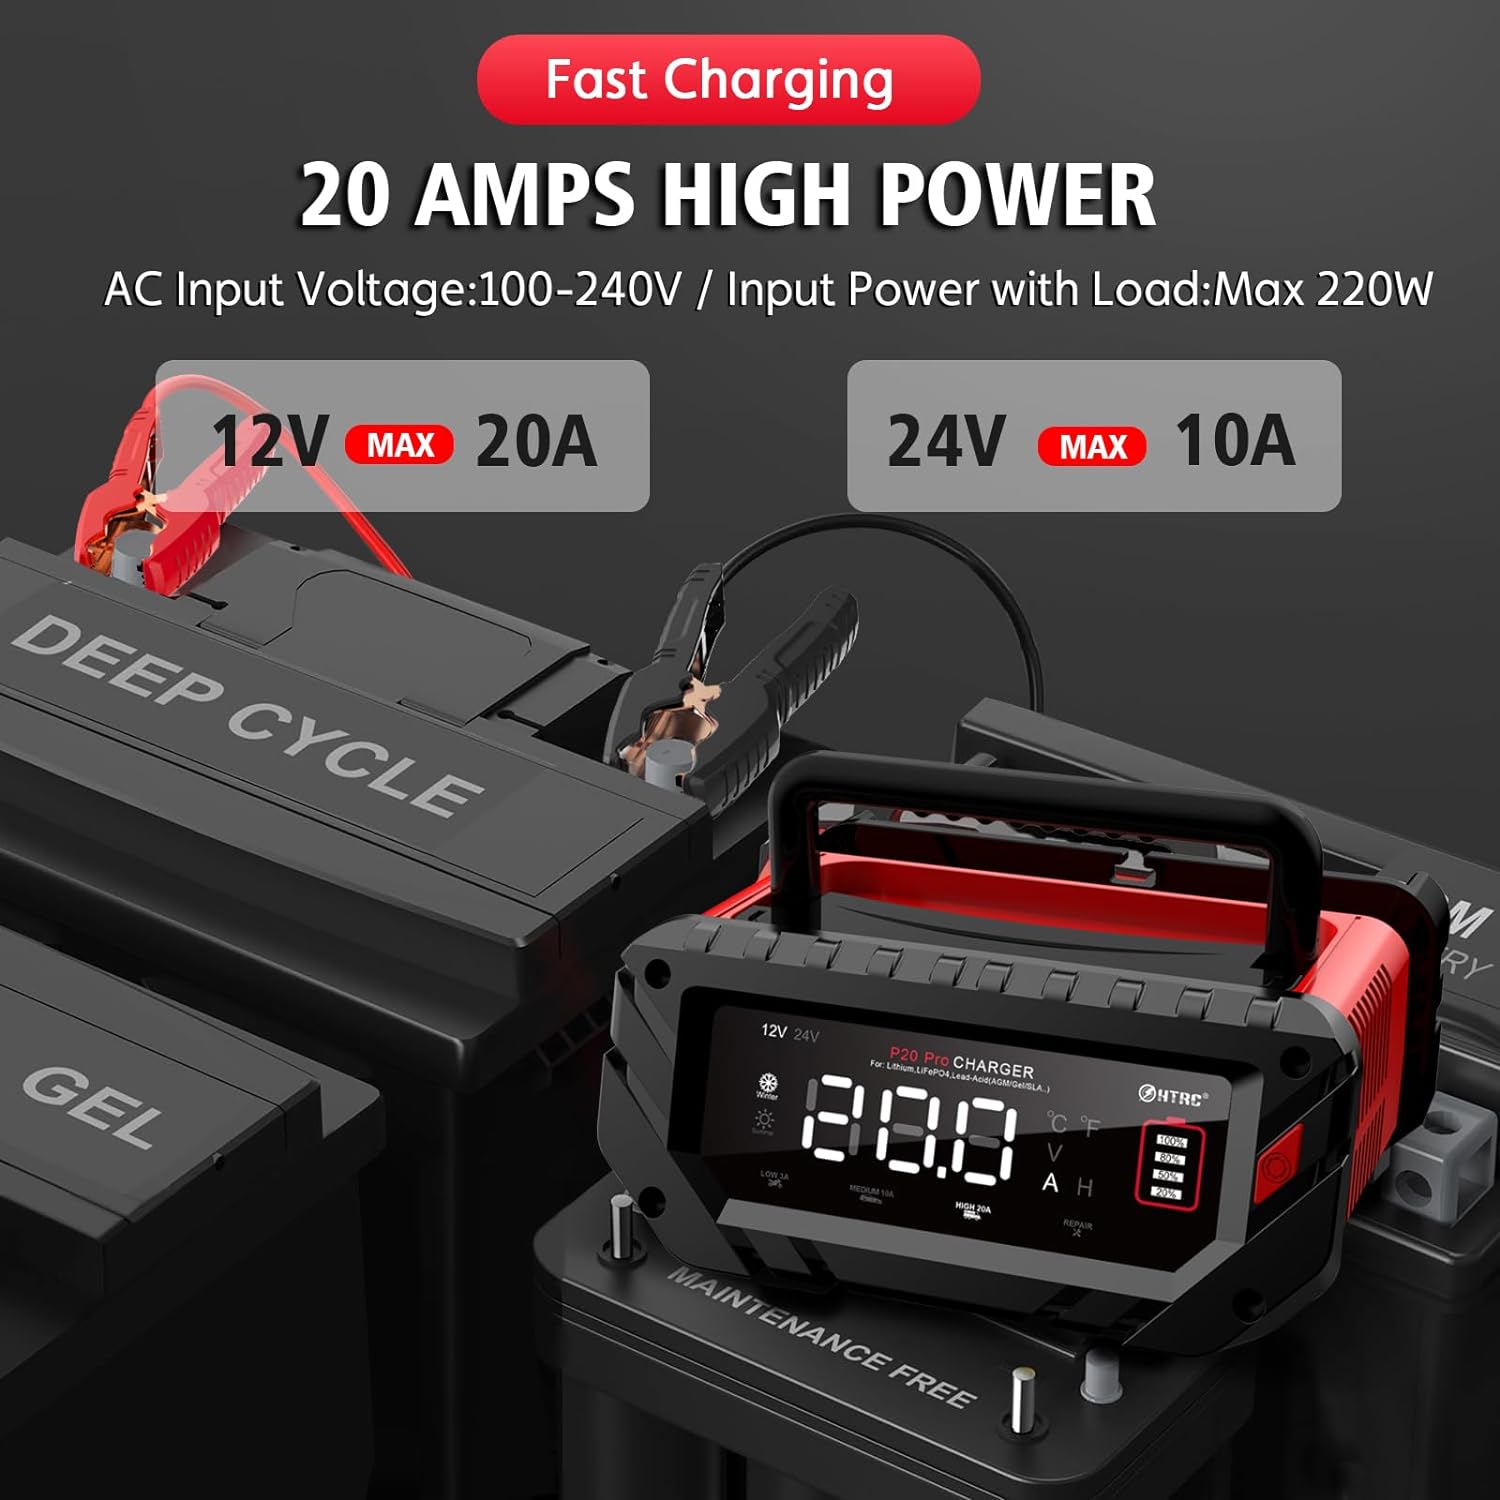 20 Amp Battery Charger, 12V/24V Fully-Automatic Smart Car Battery Charger, Lithium,Lifepo4 Float Charger, Trickle Charger, Maintainer/Pulse Repair Charger for Car, Boat, Motorcycle, Lawn Mower.. - 20 Amp Battery Charger Review